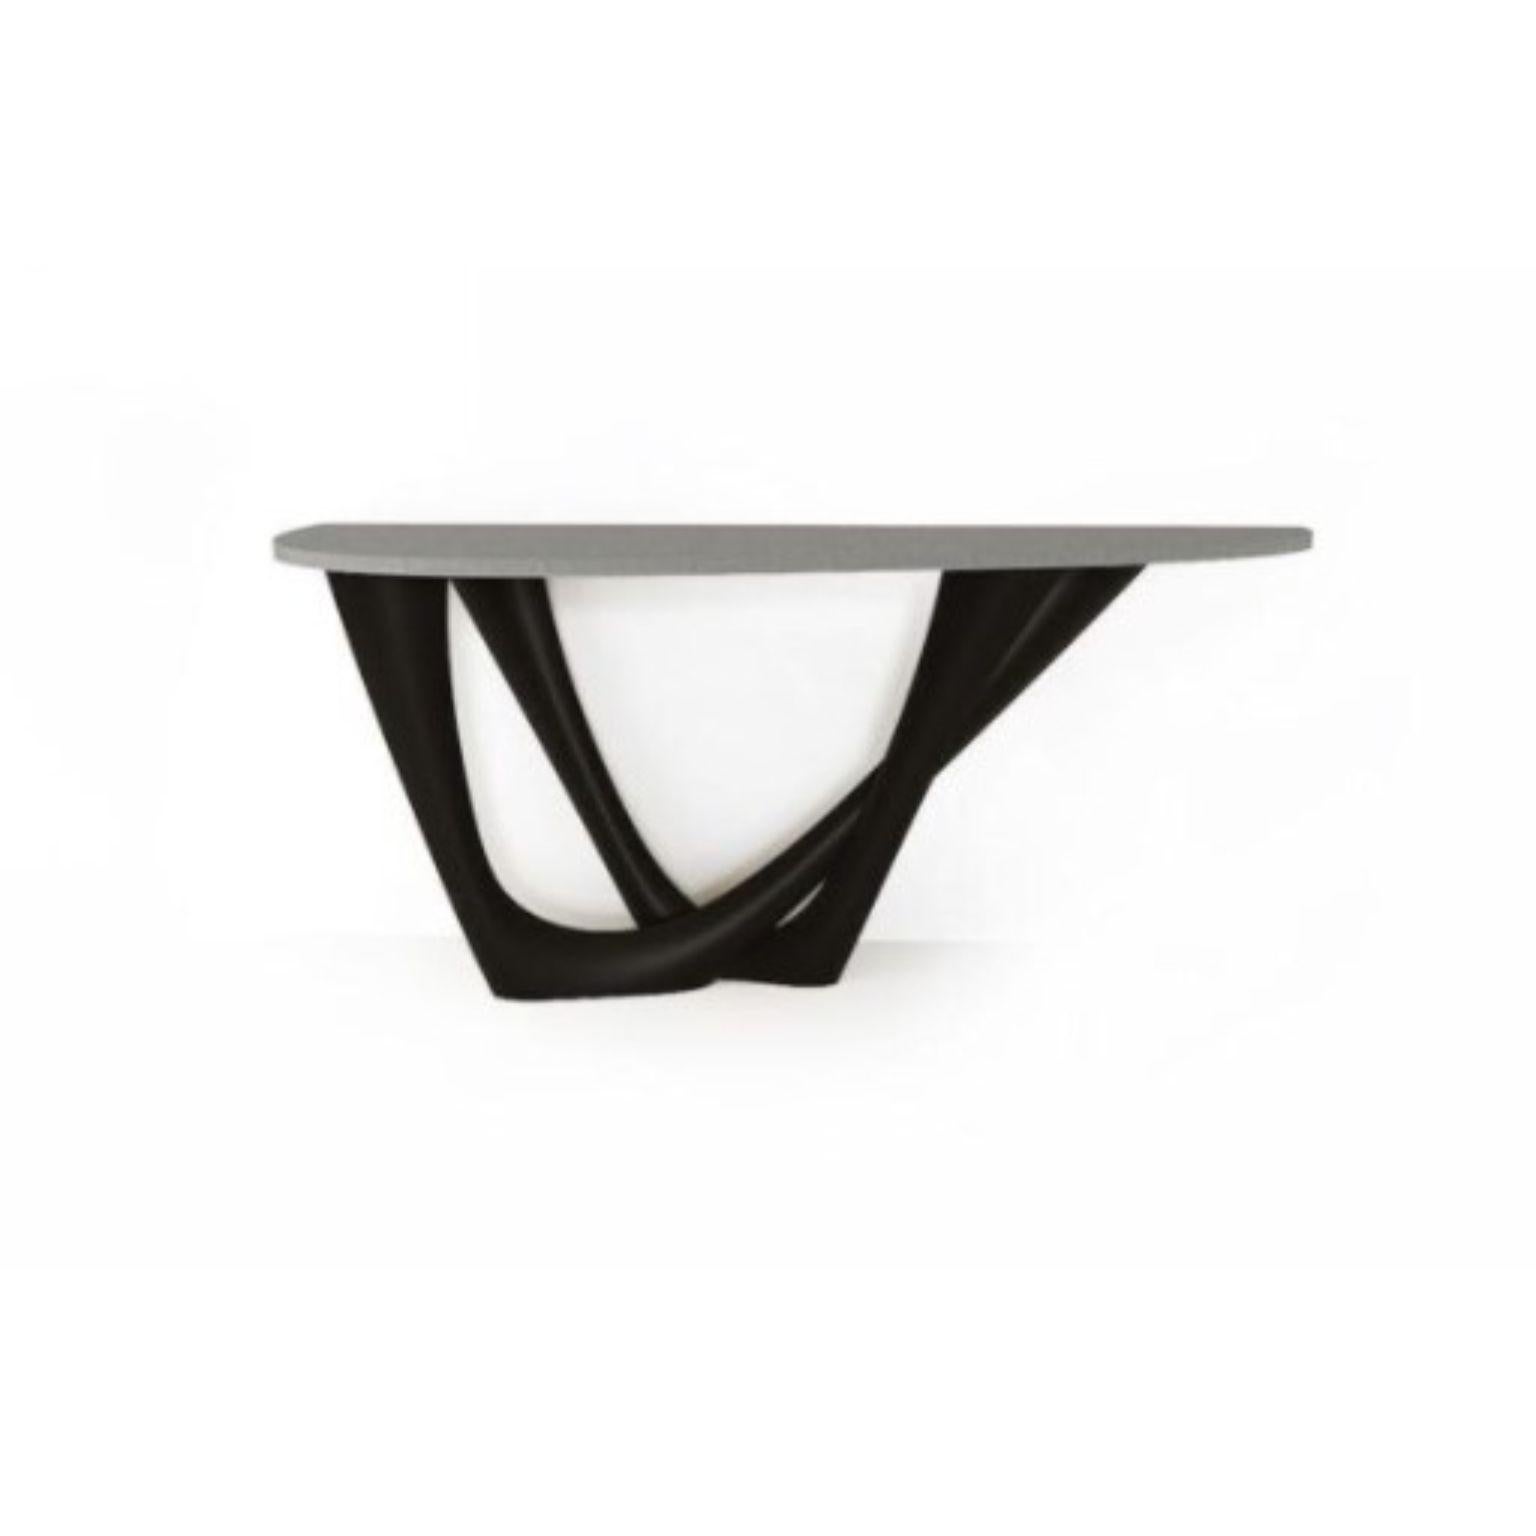 Black Brown G-console duo concrete top and steel base by Zieta
Dimensions: D 56 x W 168 x H 75 cm 
Material: Carbon steel, concrete.
Also available in different colors and dimensions.

G-Console is another bionic object in our collection. Created